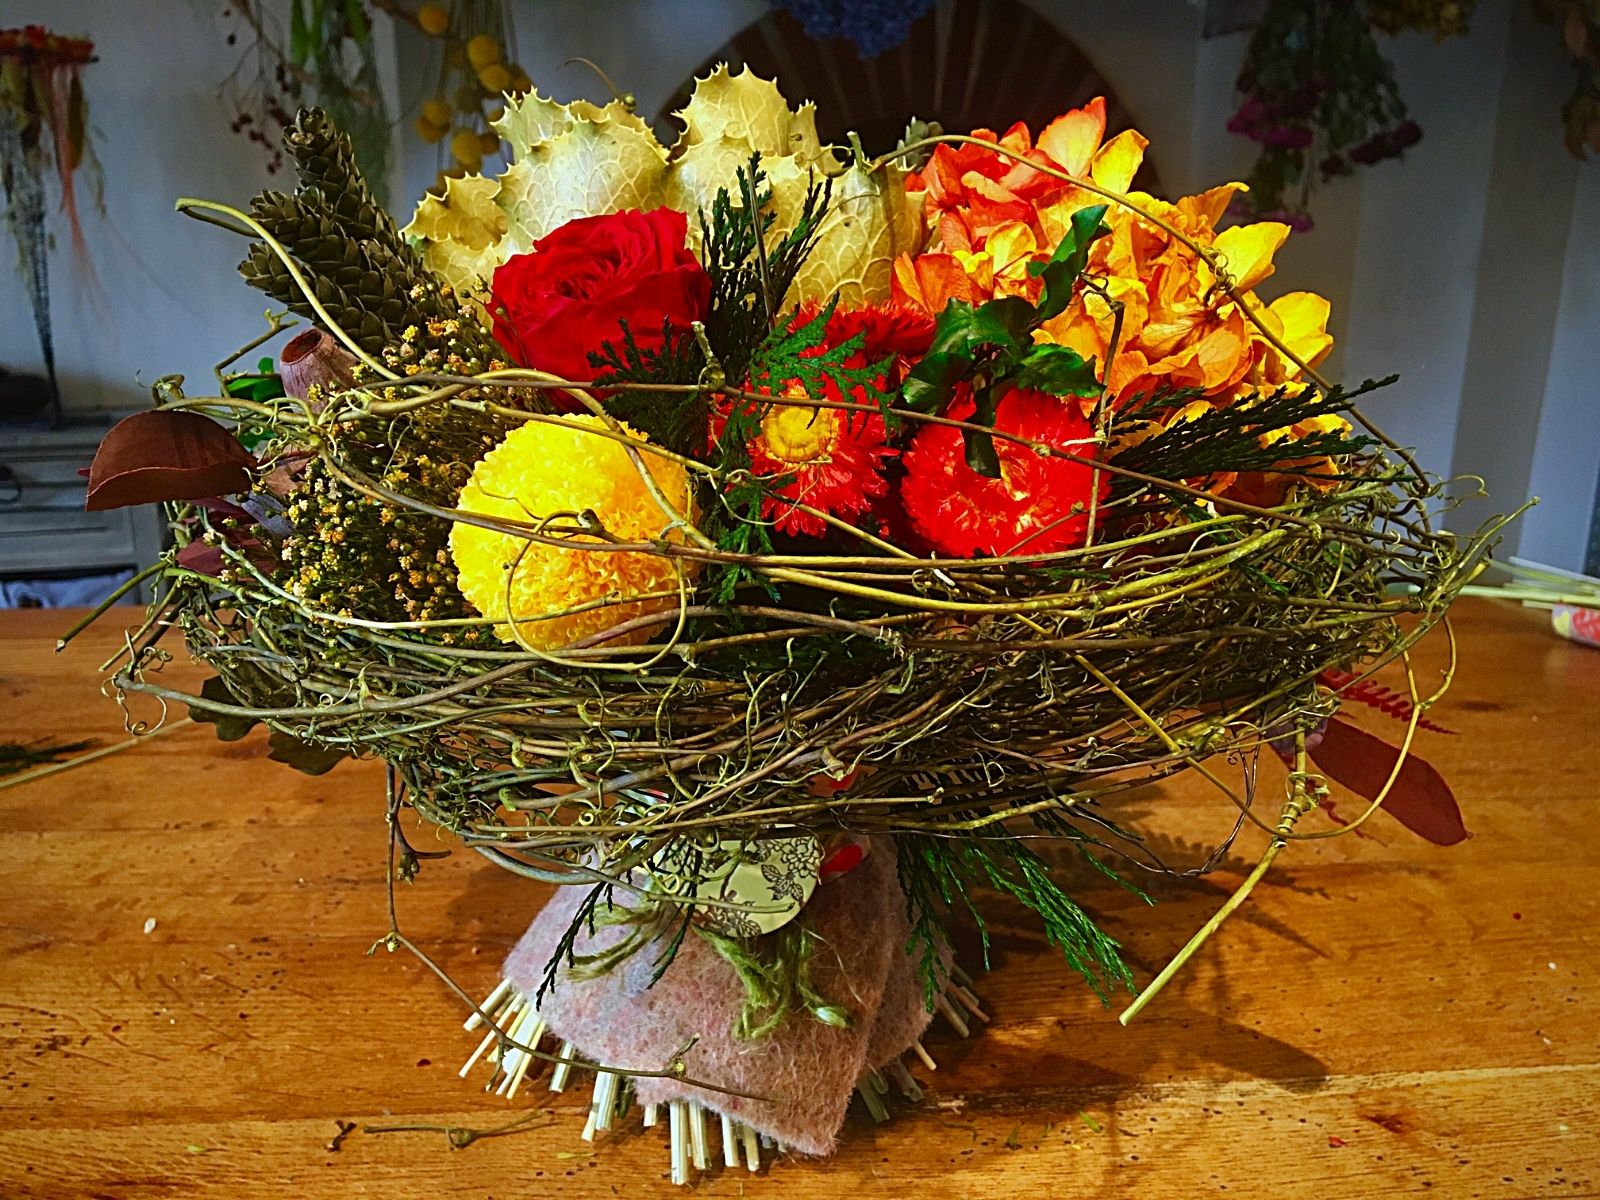 Great Time for Dried Flowers - Mikala Forcellini - Mixed flowers 4